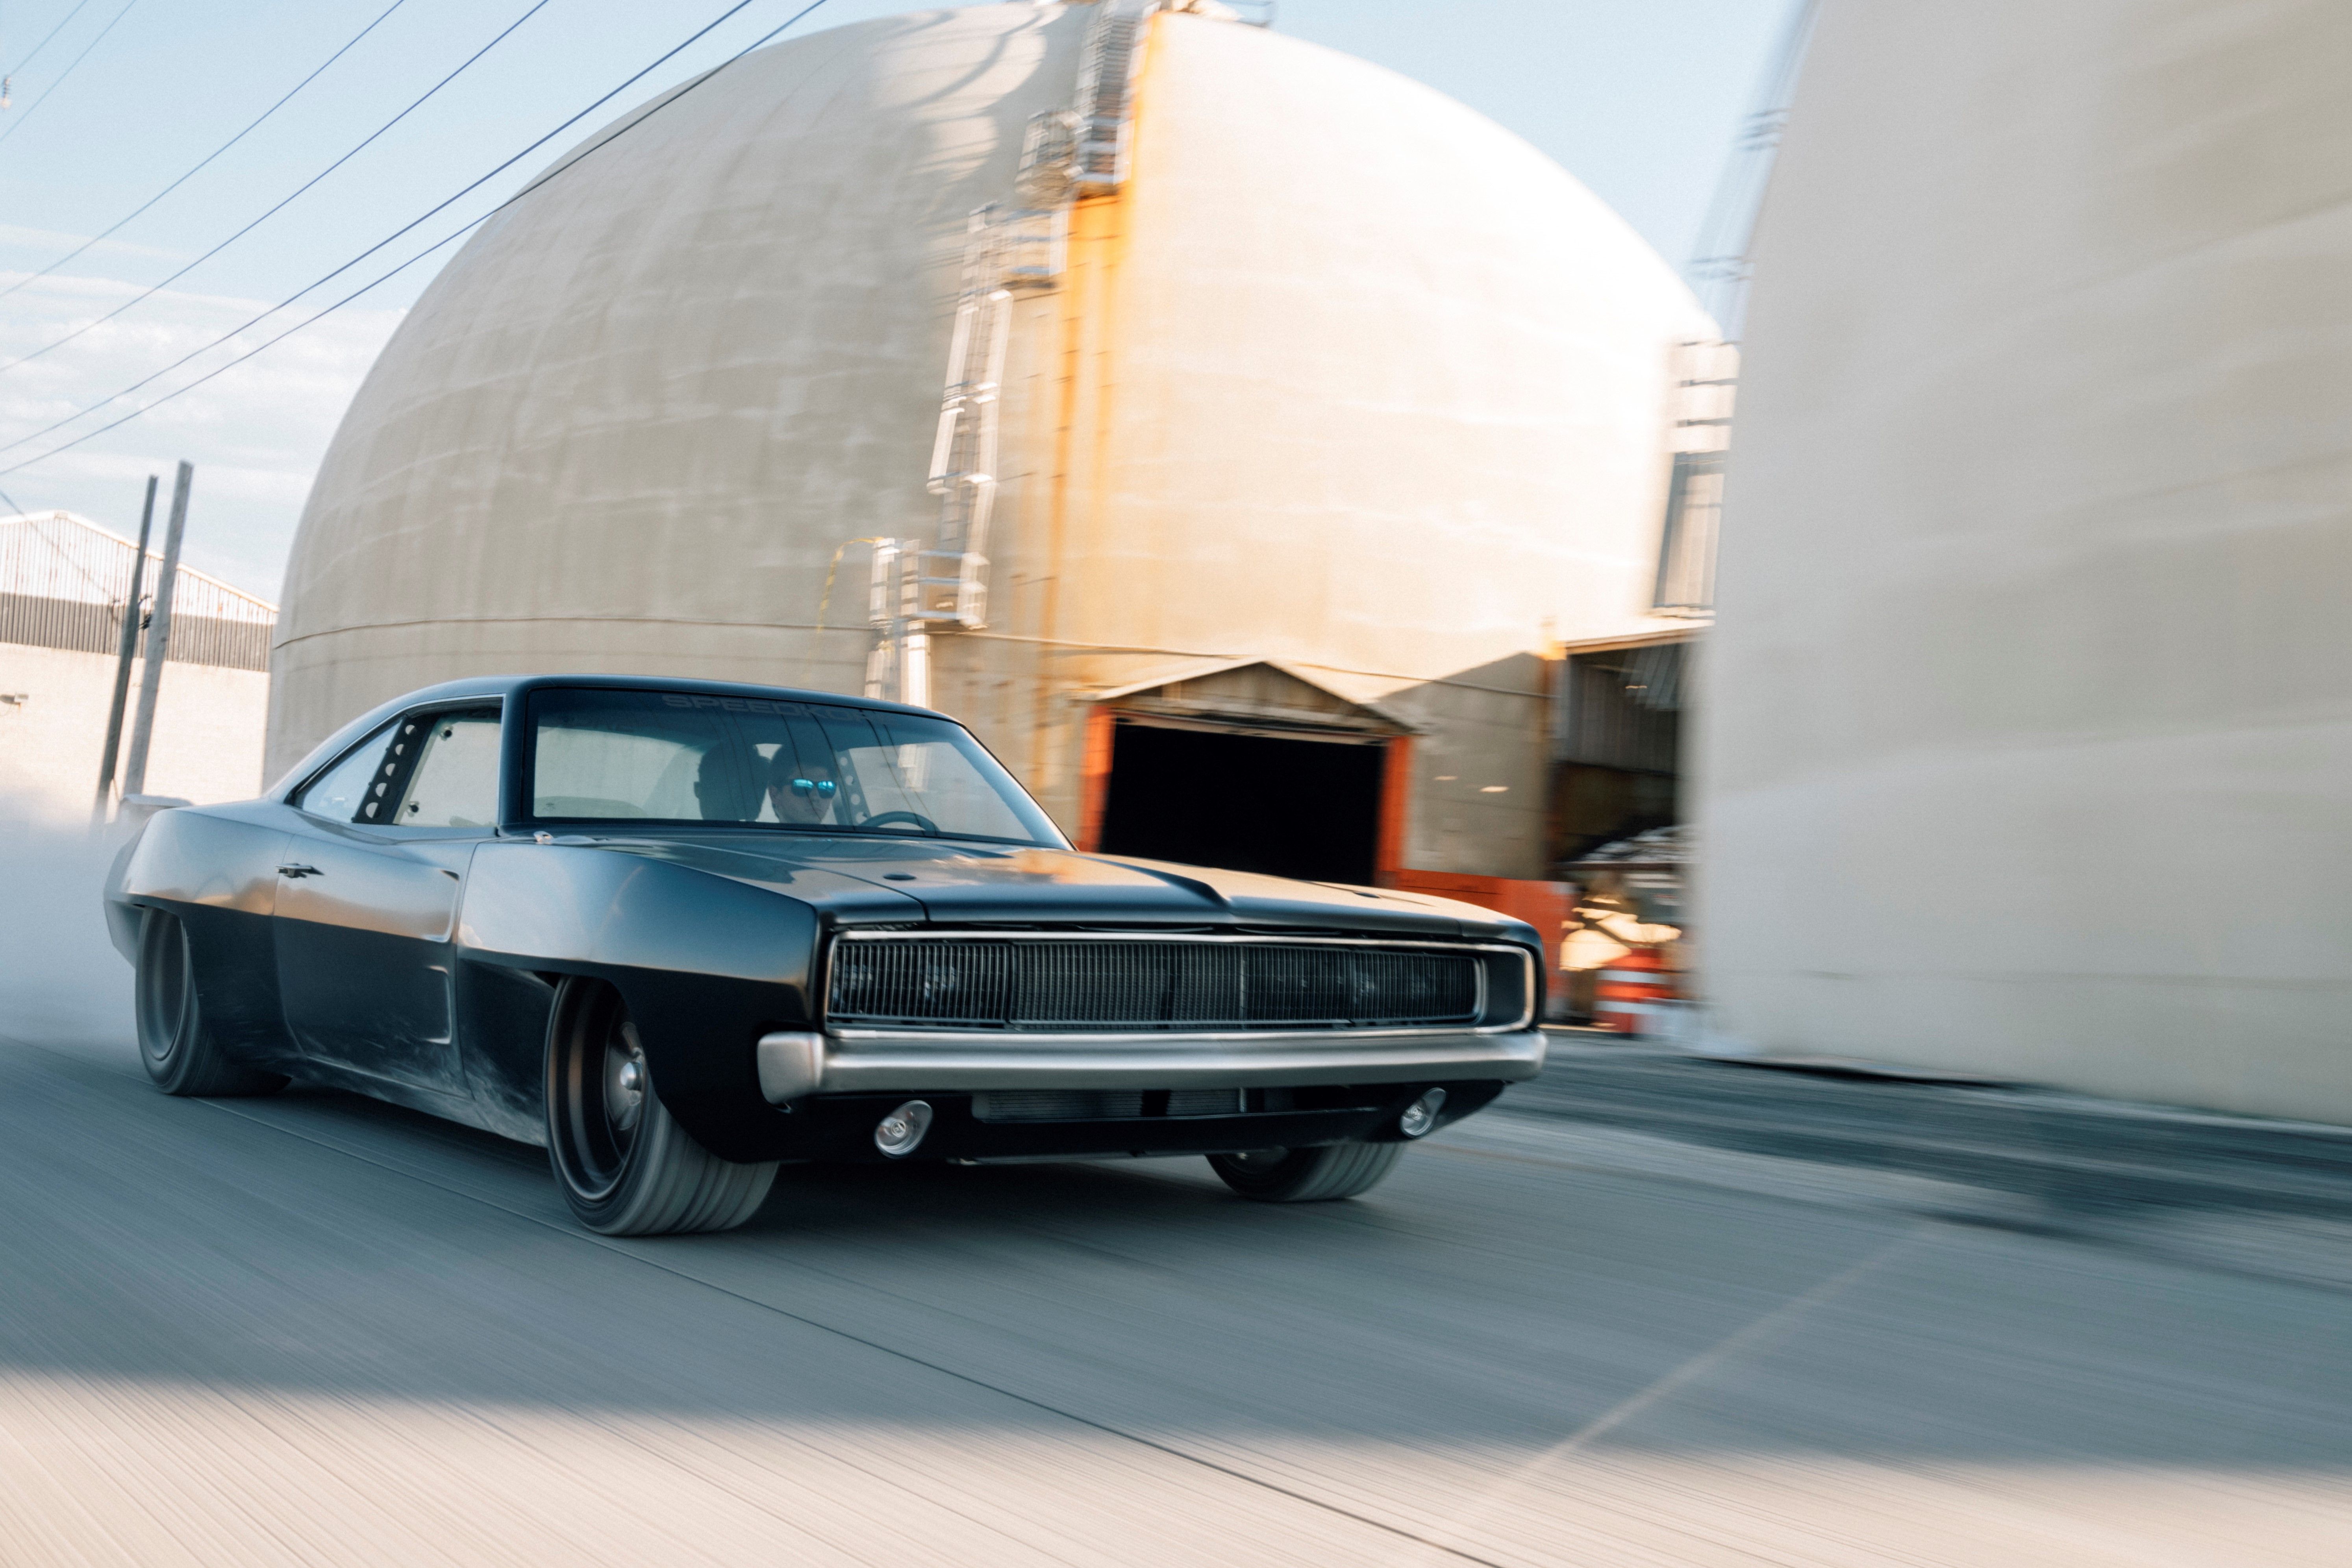 Auto Control - 1968 Dodge Charger | Facebook